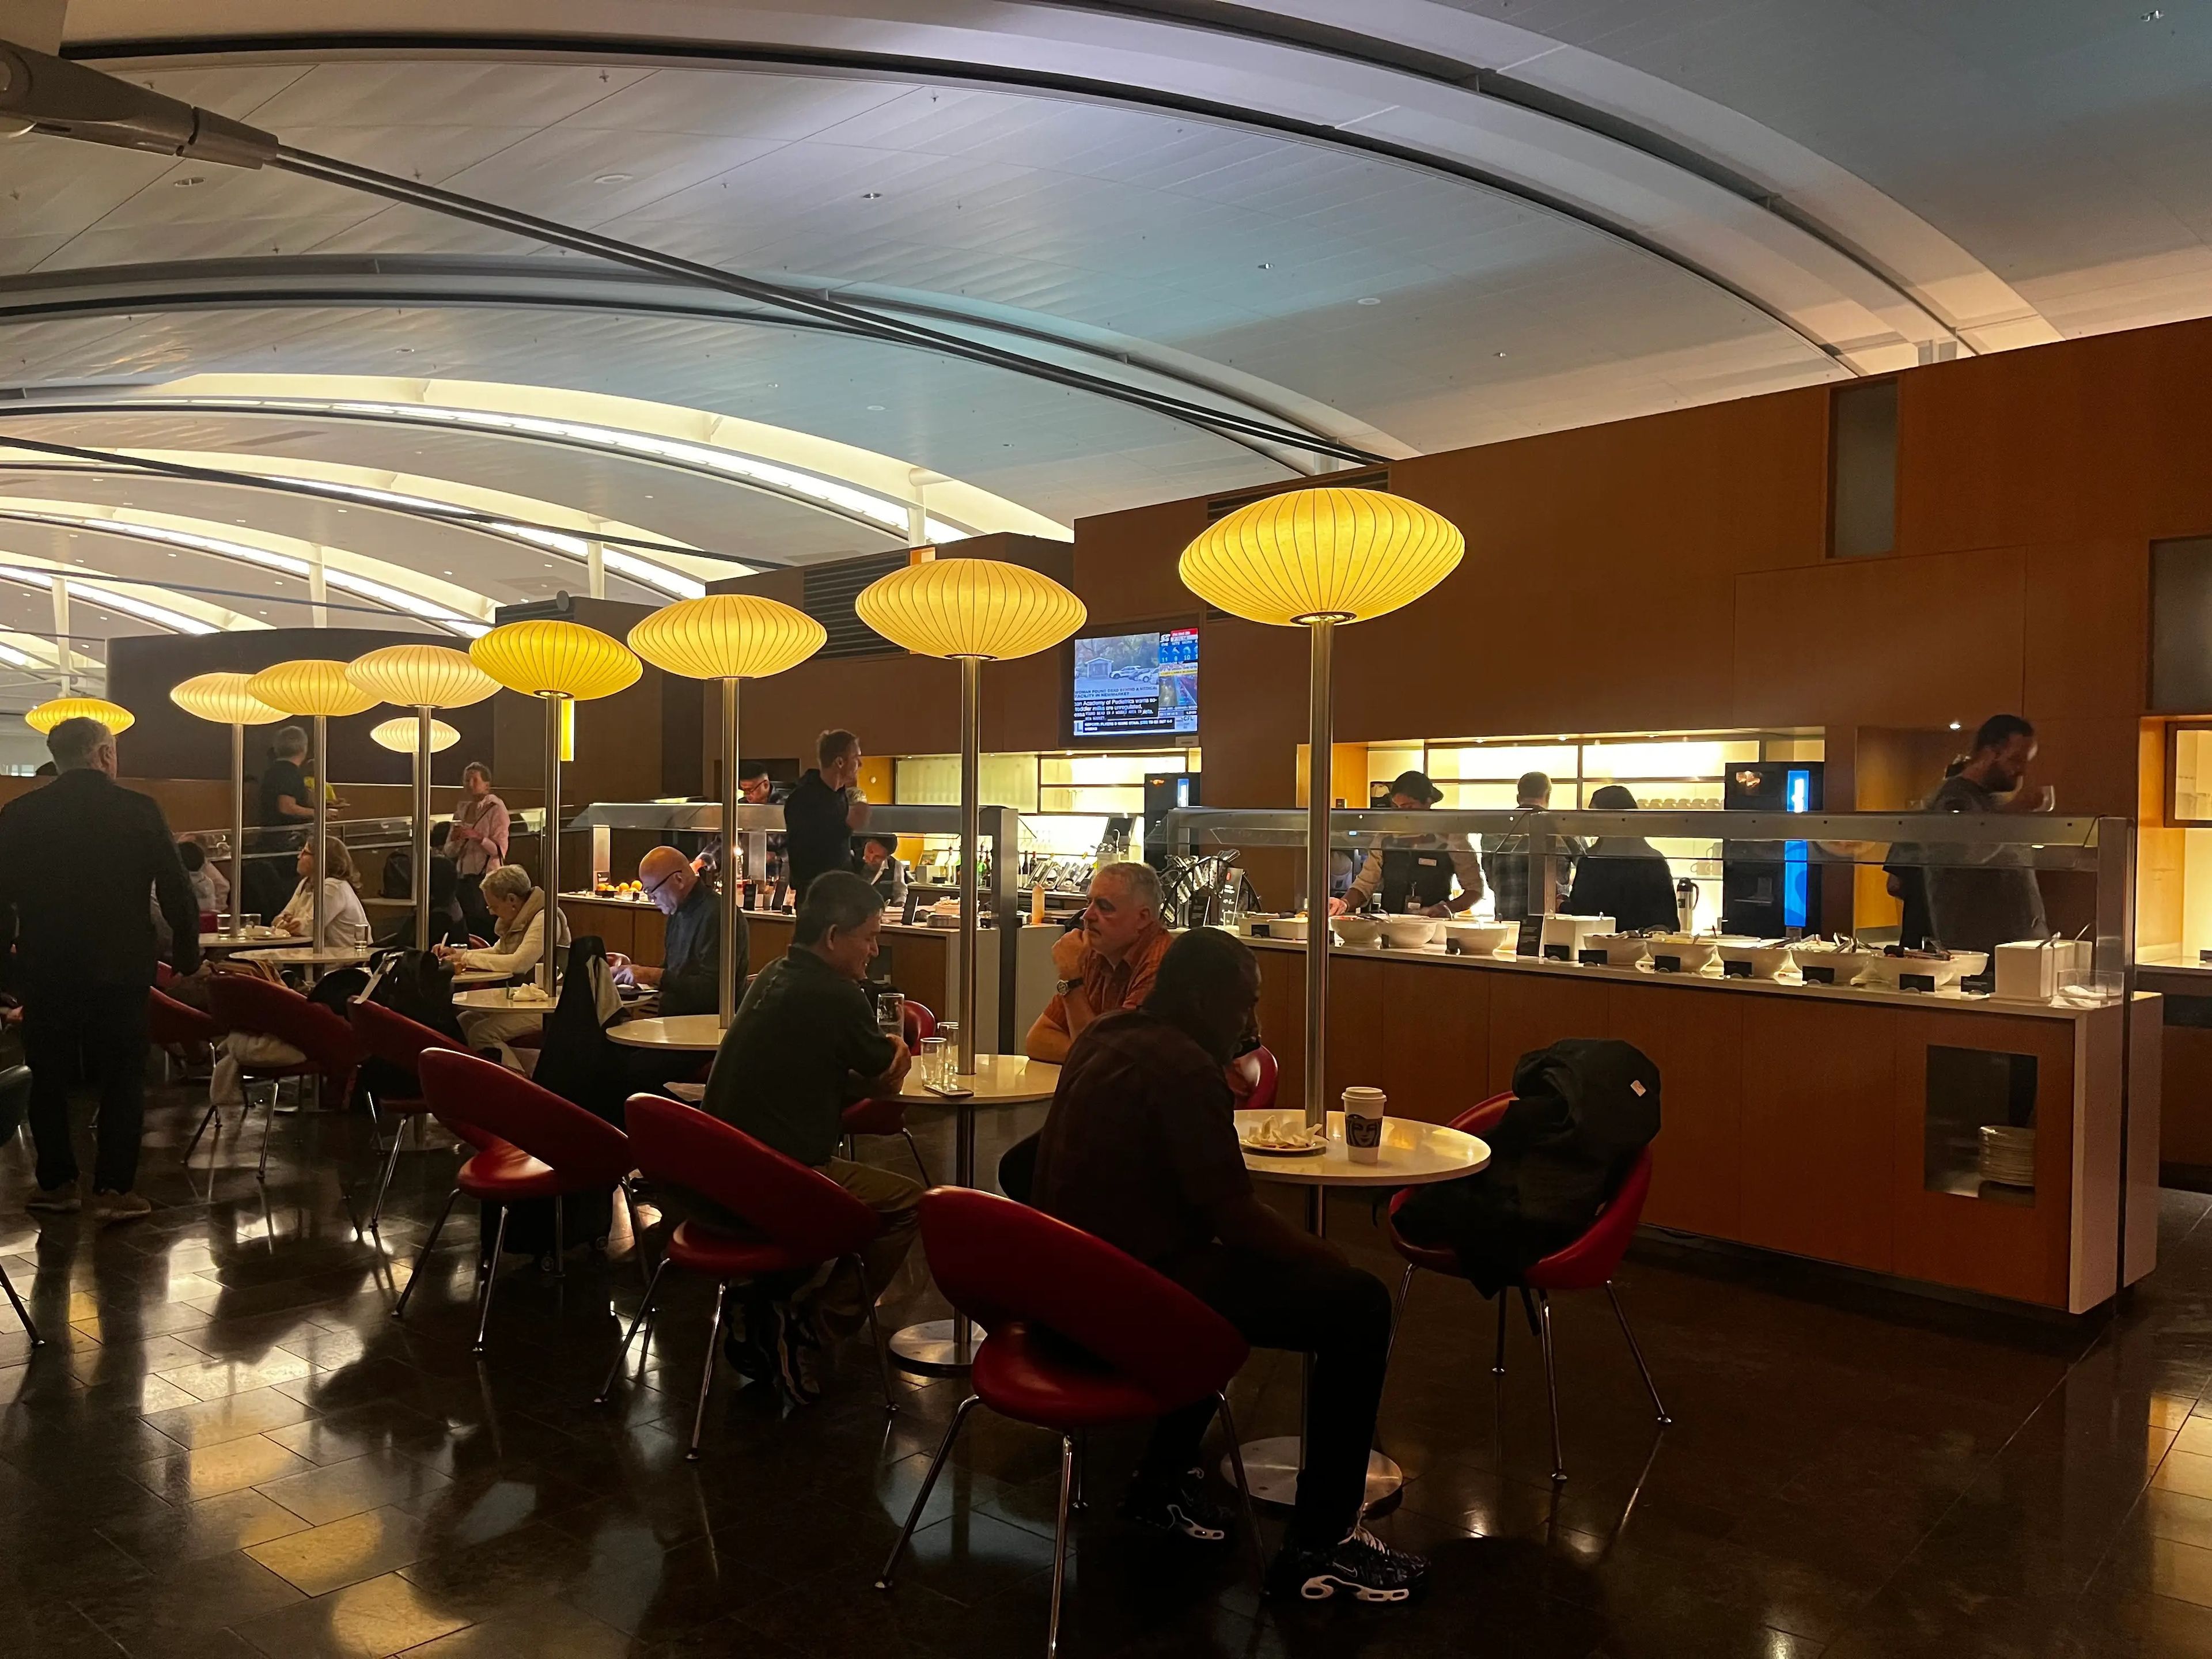 Lounge in airport filled with round tables with oblong light fixtures above them